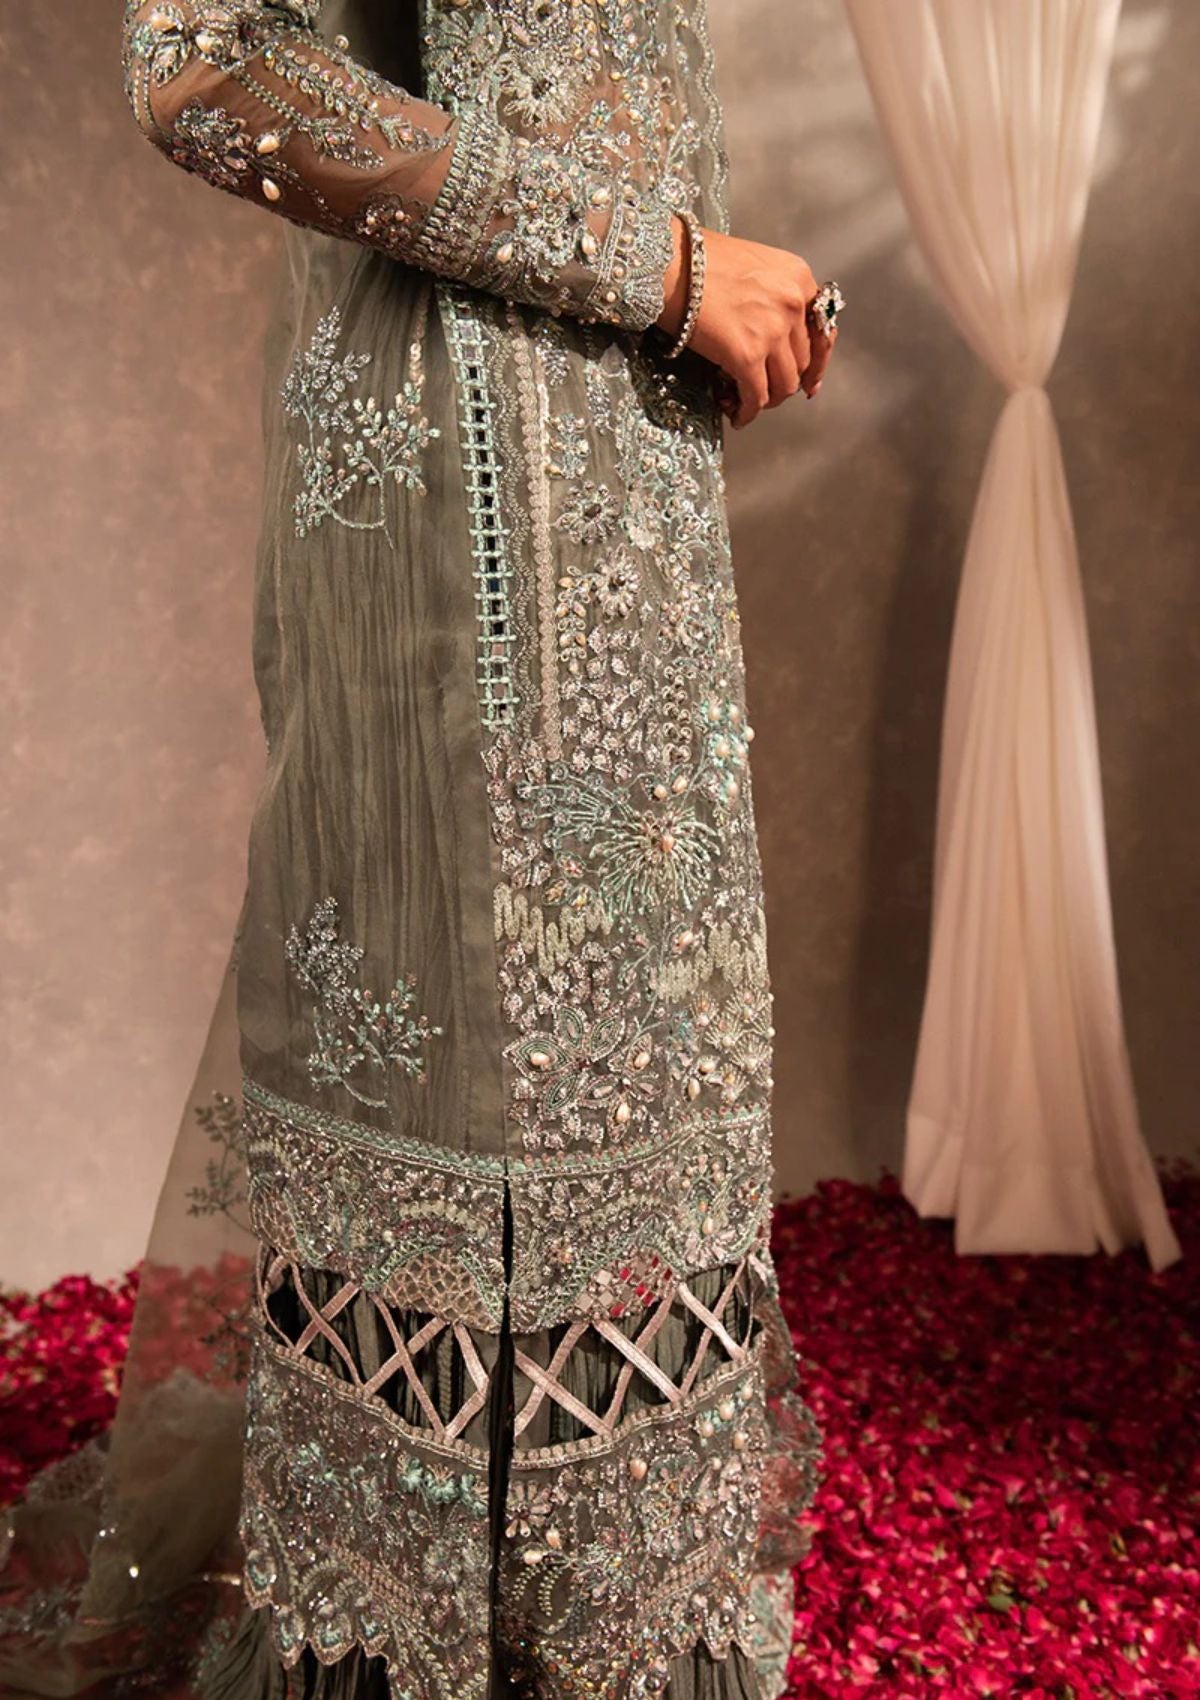 Formal Collection - Maria Osama Khan - Dastaan - DS#01 - Mehr